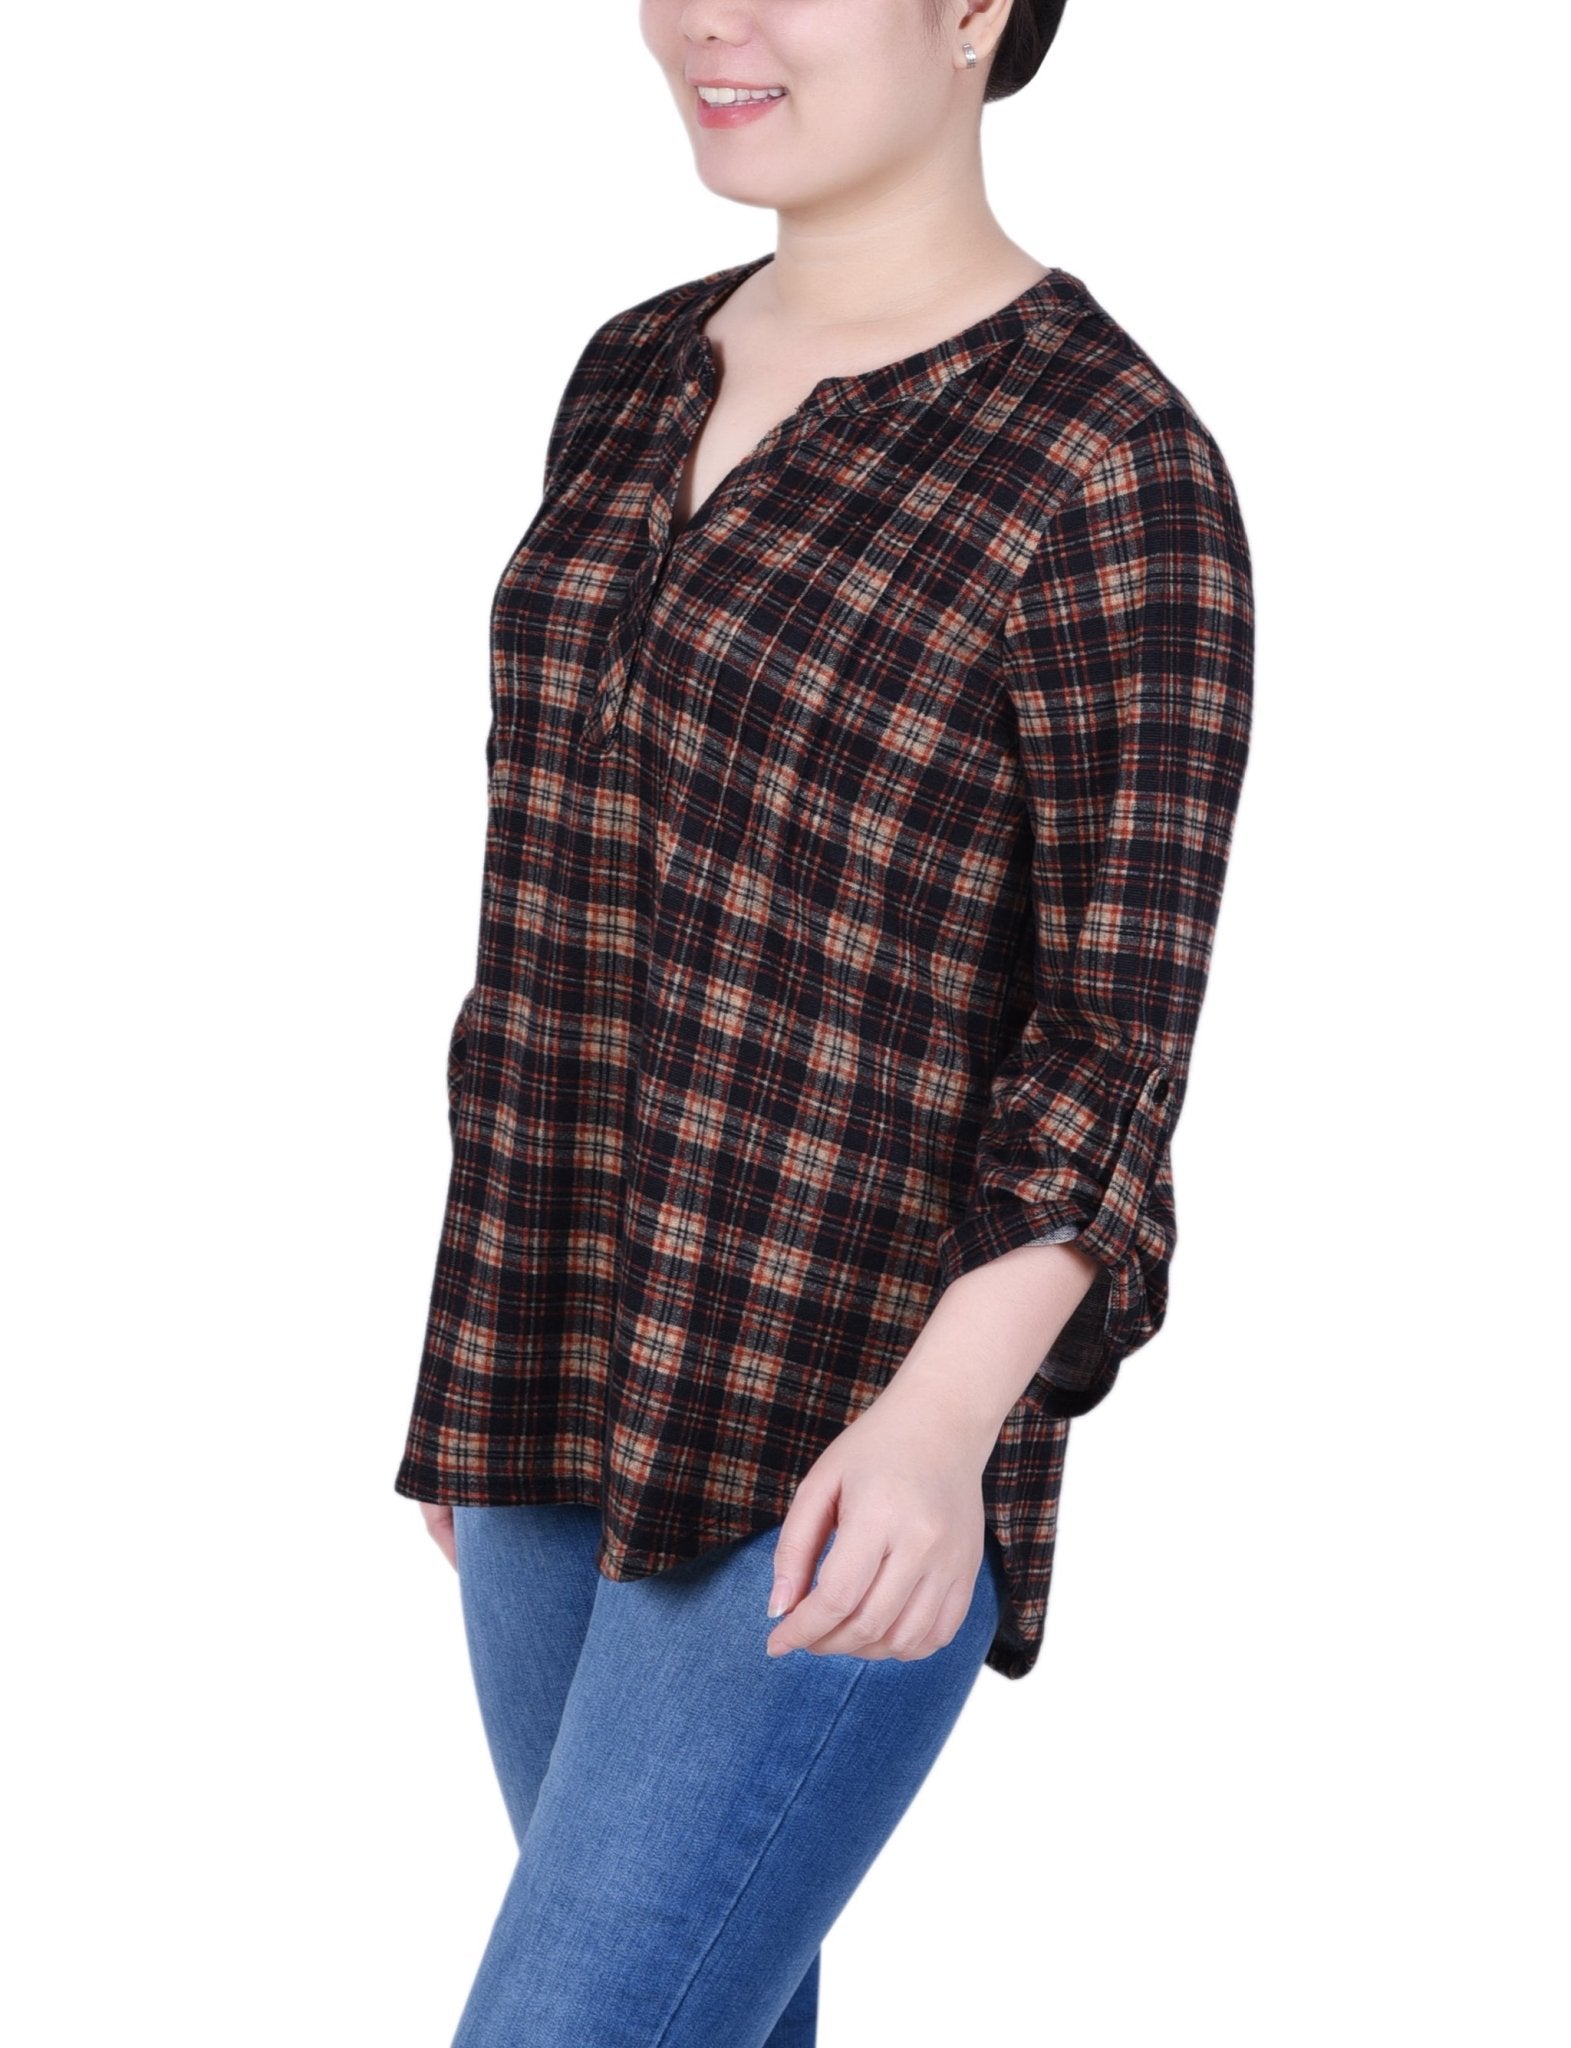 NY Collection 3/4 Roll Sleeve Top - Petite - DressbarnShirts & Blouses